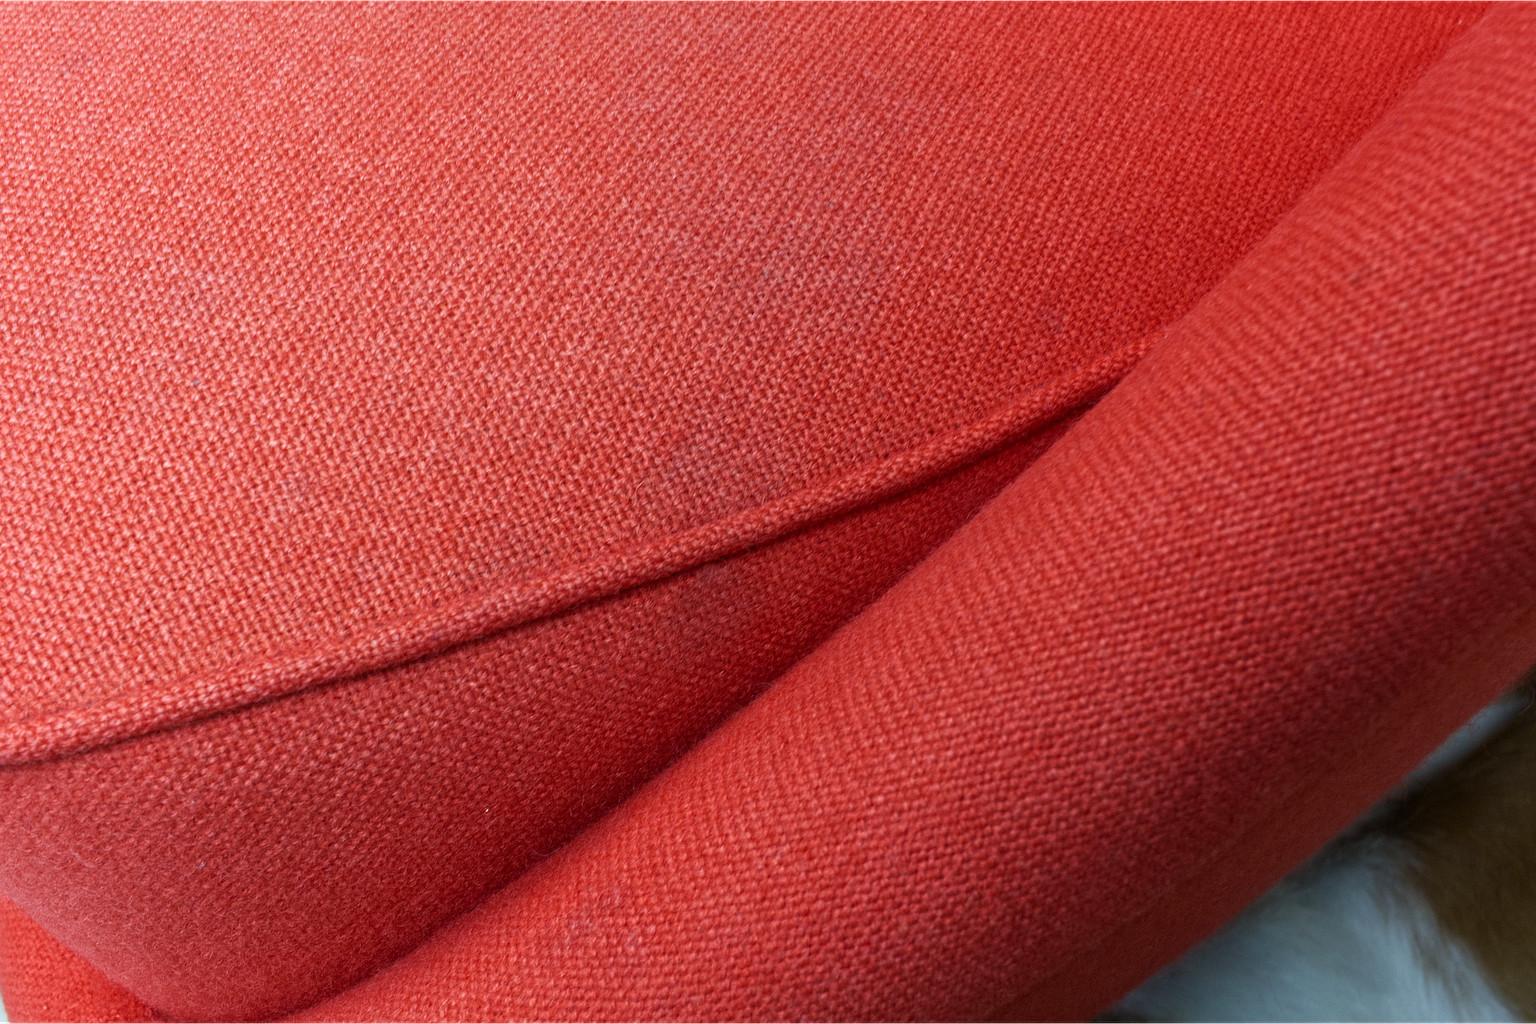 Fabric 1958 Theo Ruth Red Club Chair no. 115 for Artifort, the Netherlands